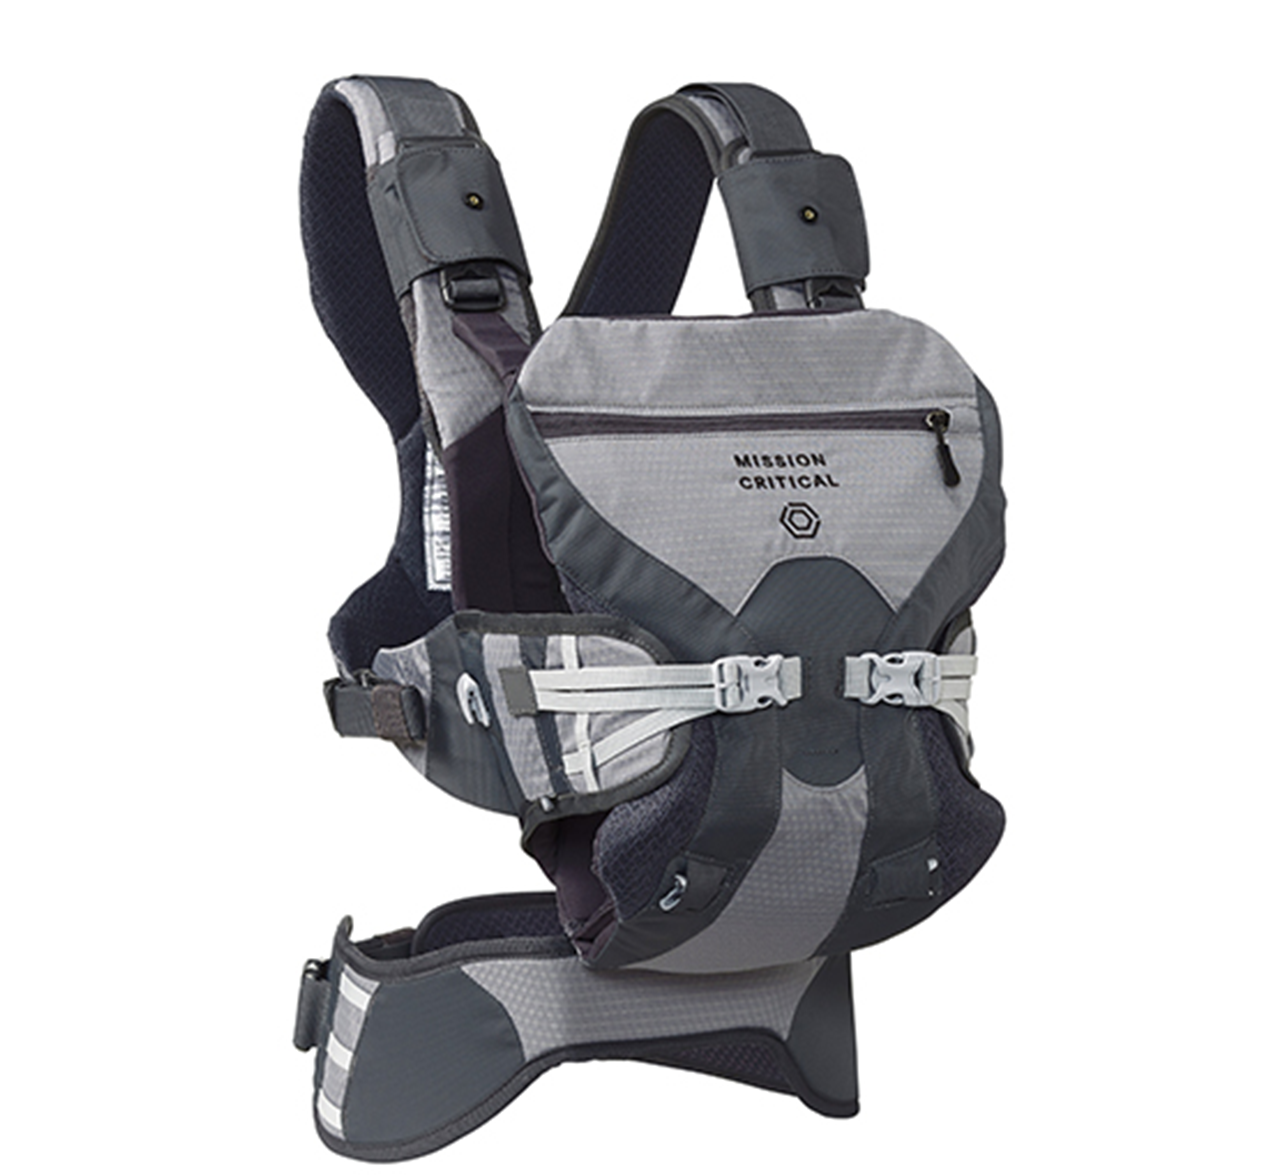 S.02 Adventure Baby Carrier Features - Mission Critical